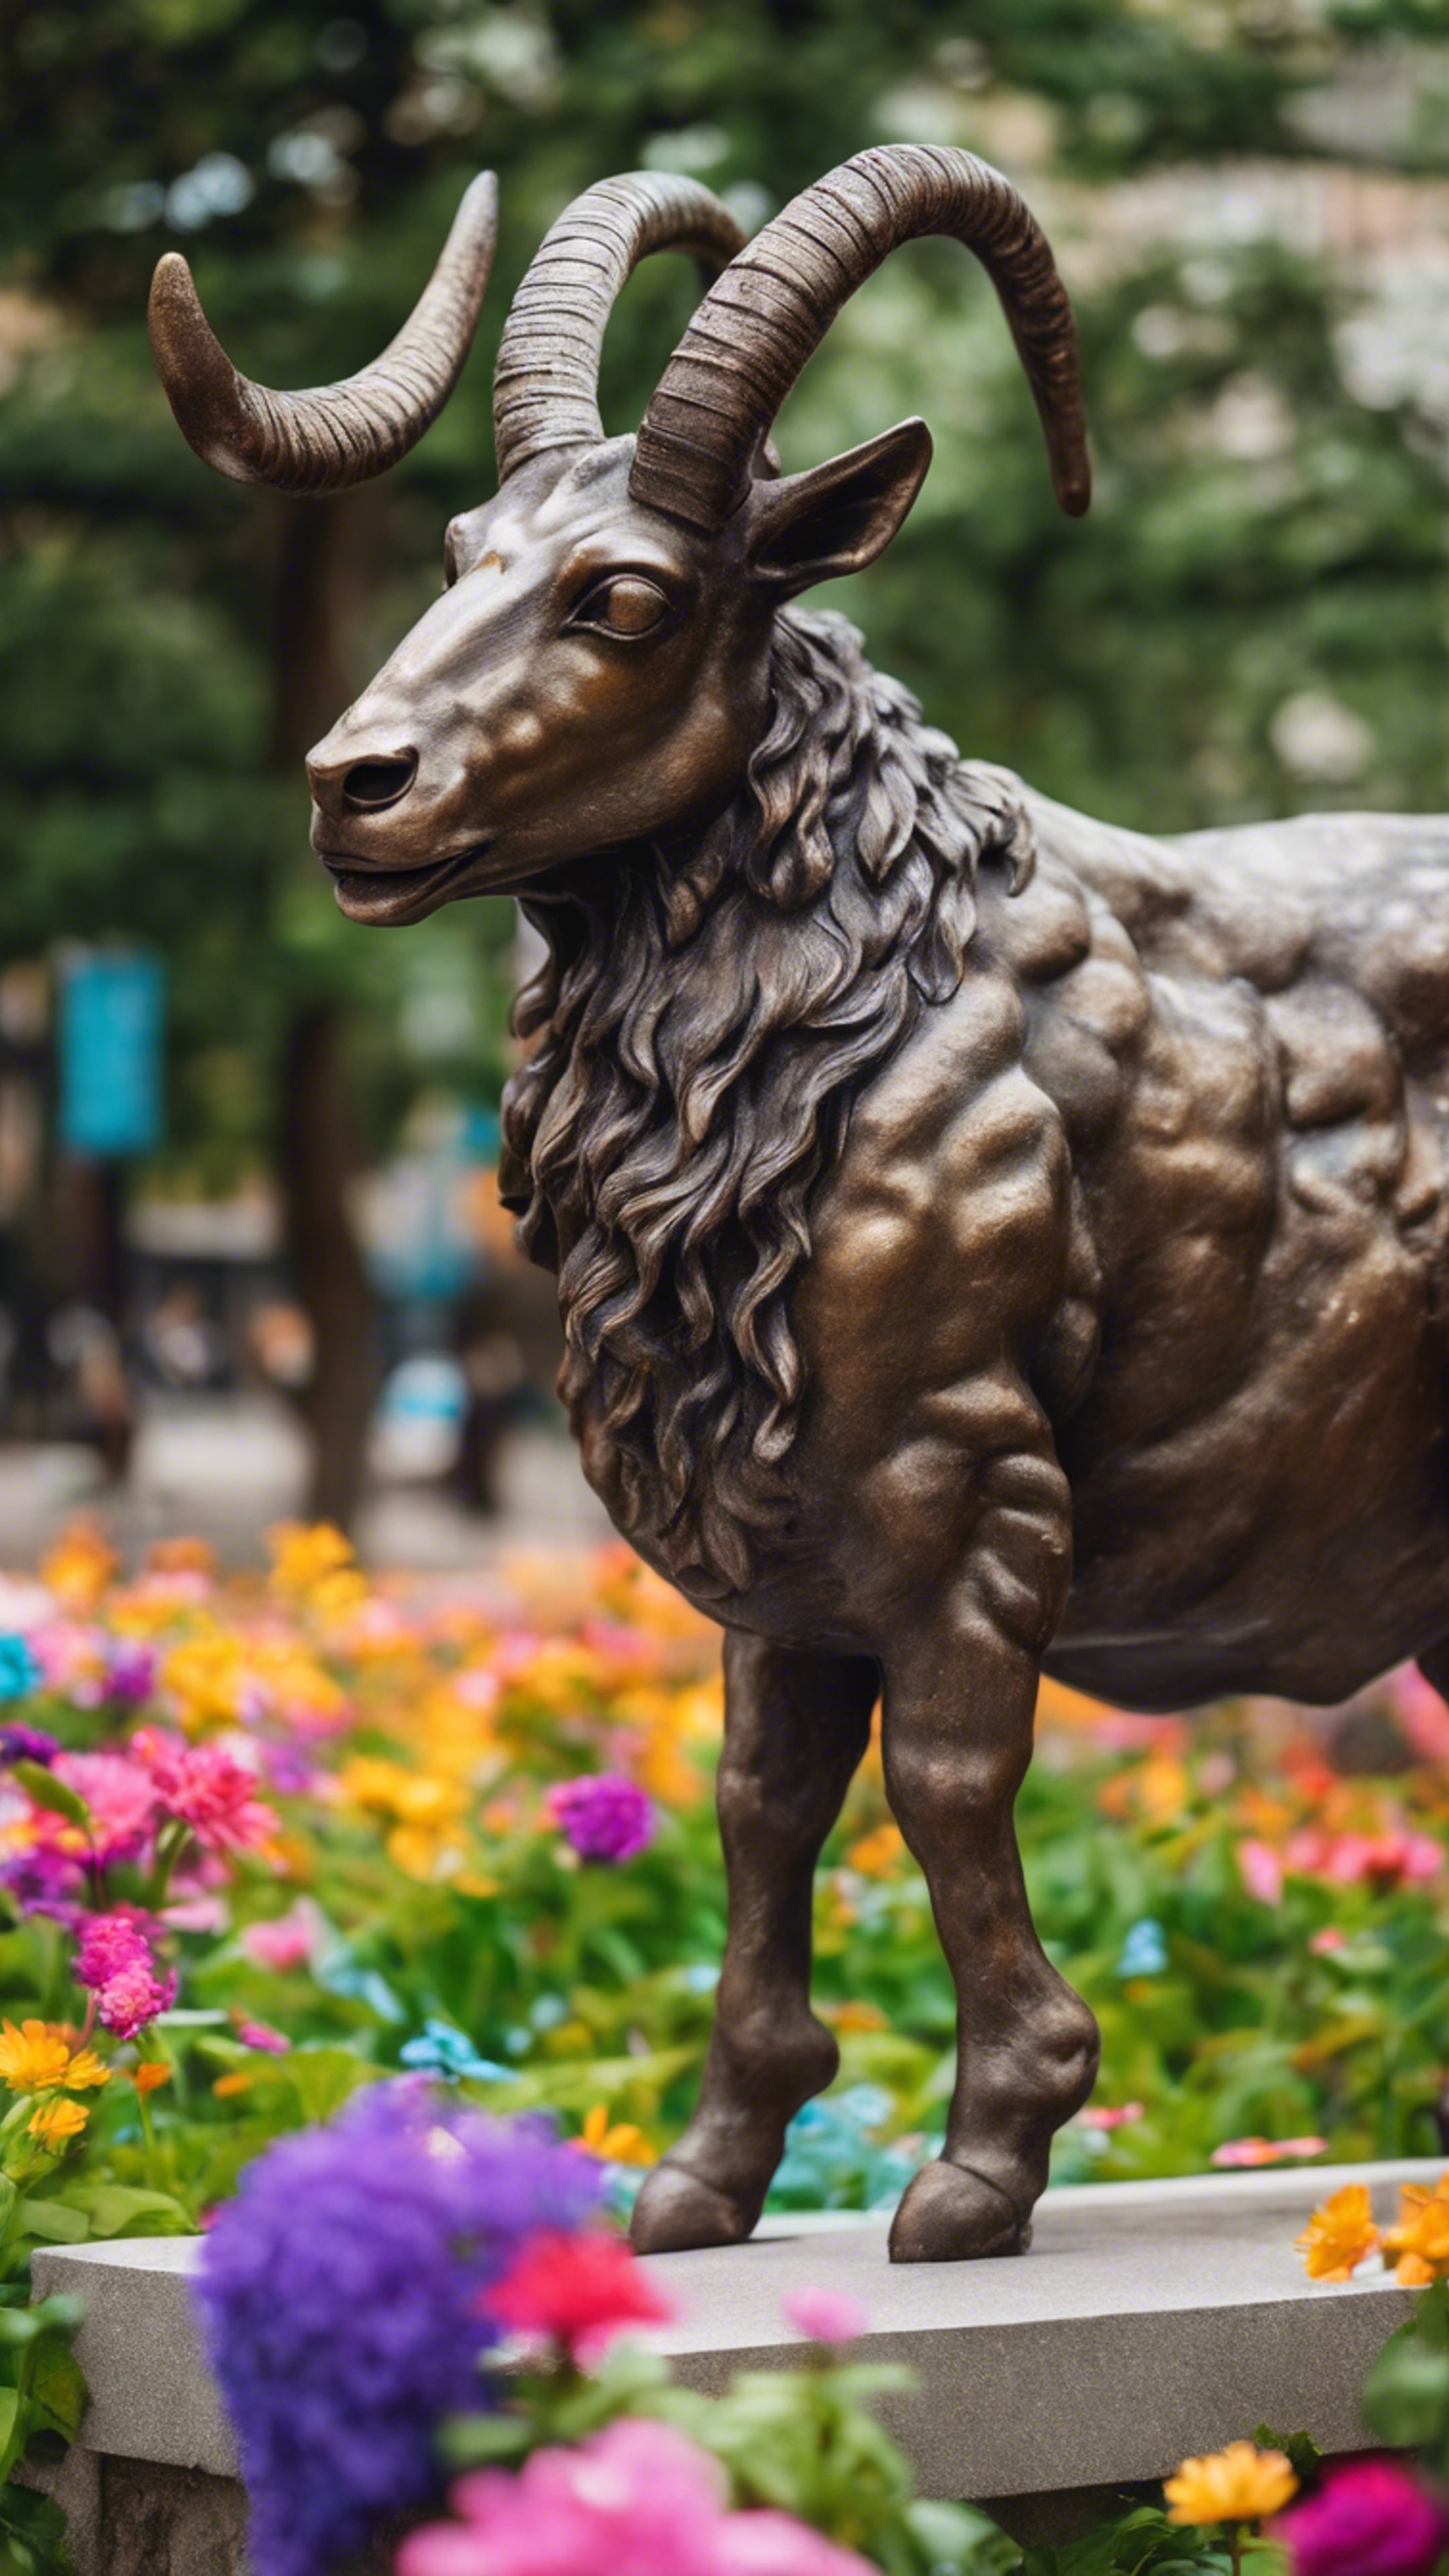 A detailed bronze statue of a Capricorn in a lively city park, surrounded by colorful flowers. Behang[4693ead8121f483a9fe2]